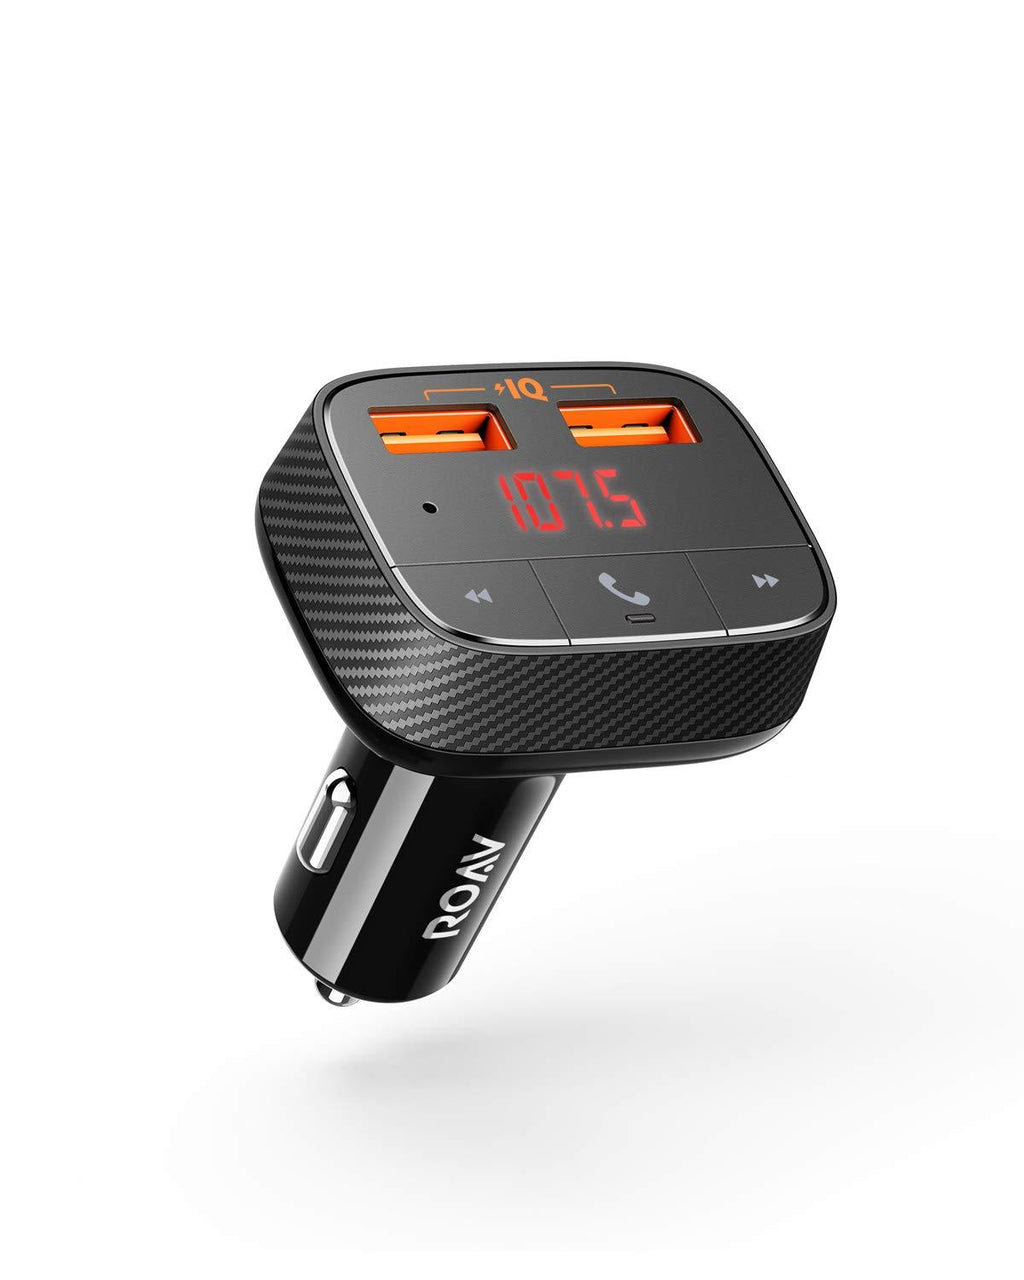 Anker ROAV SmartCharge F0 Bluetooth FM Transmitter for Car, Audio Adapter and Receiver, Hands-Free Calling, MP3 Car Charger with 2 USB Ports, PowerIQ, and AUX Output (No Dedicated App) - LeoForward Australia